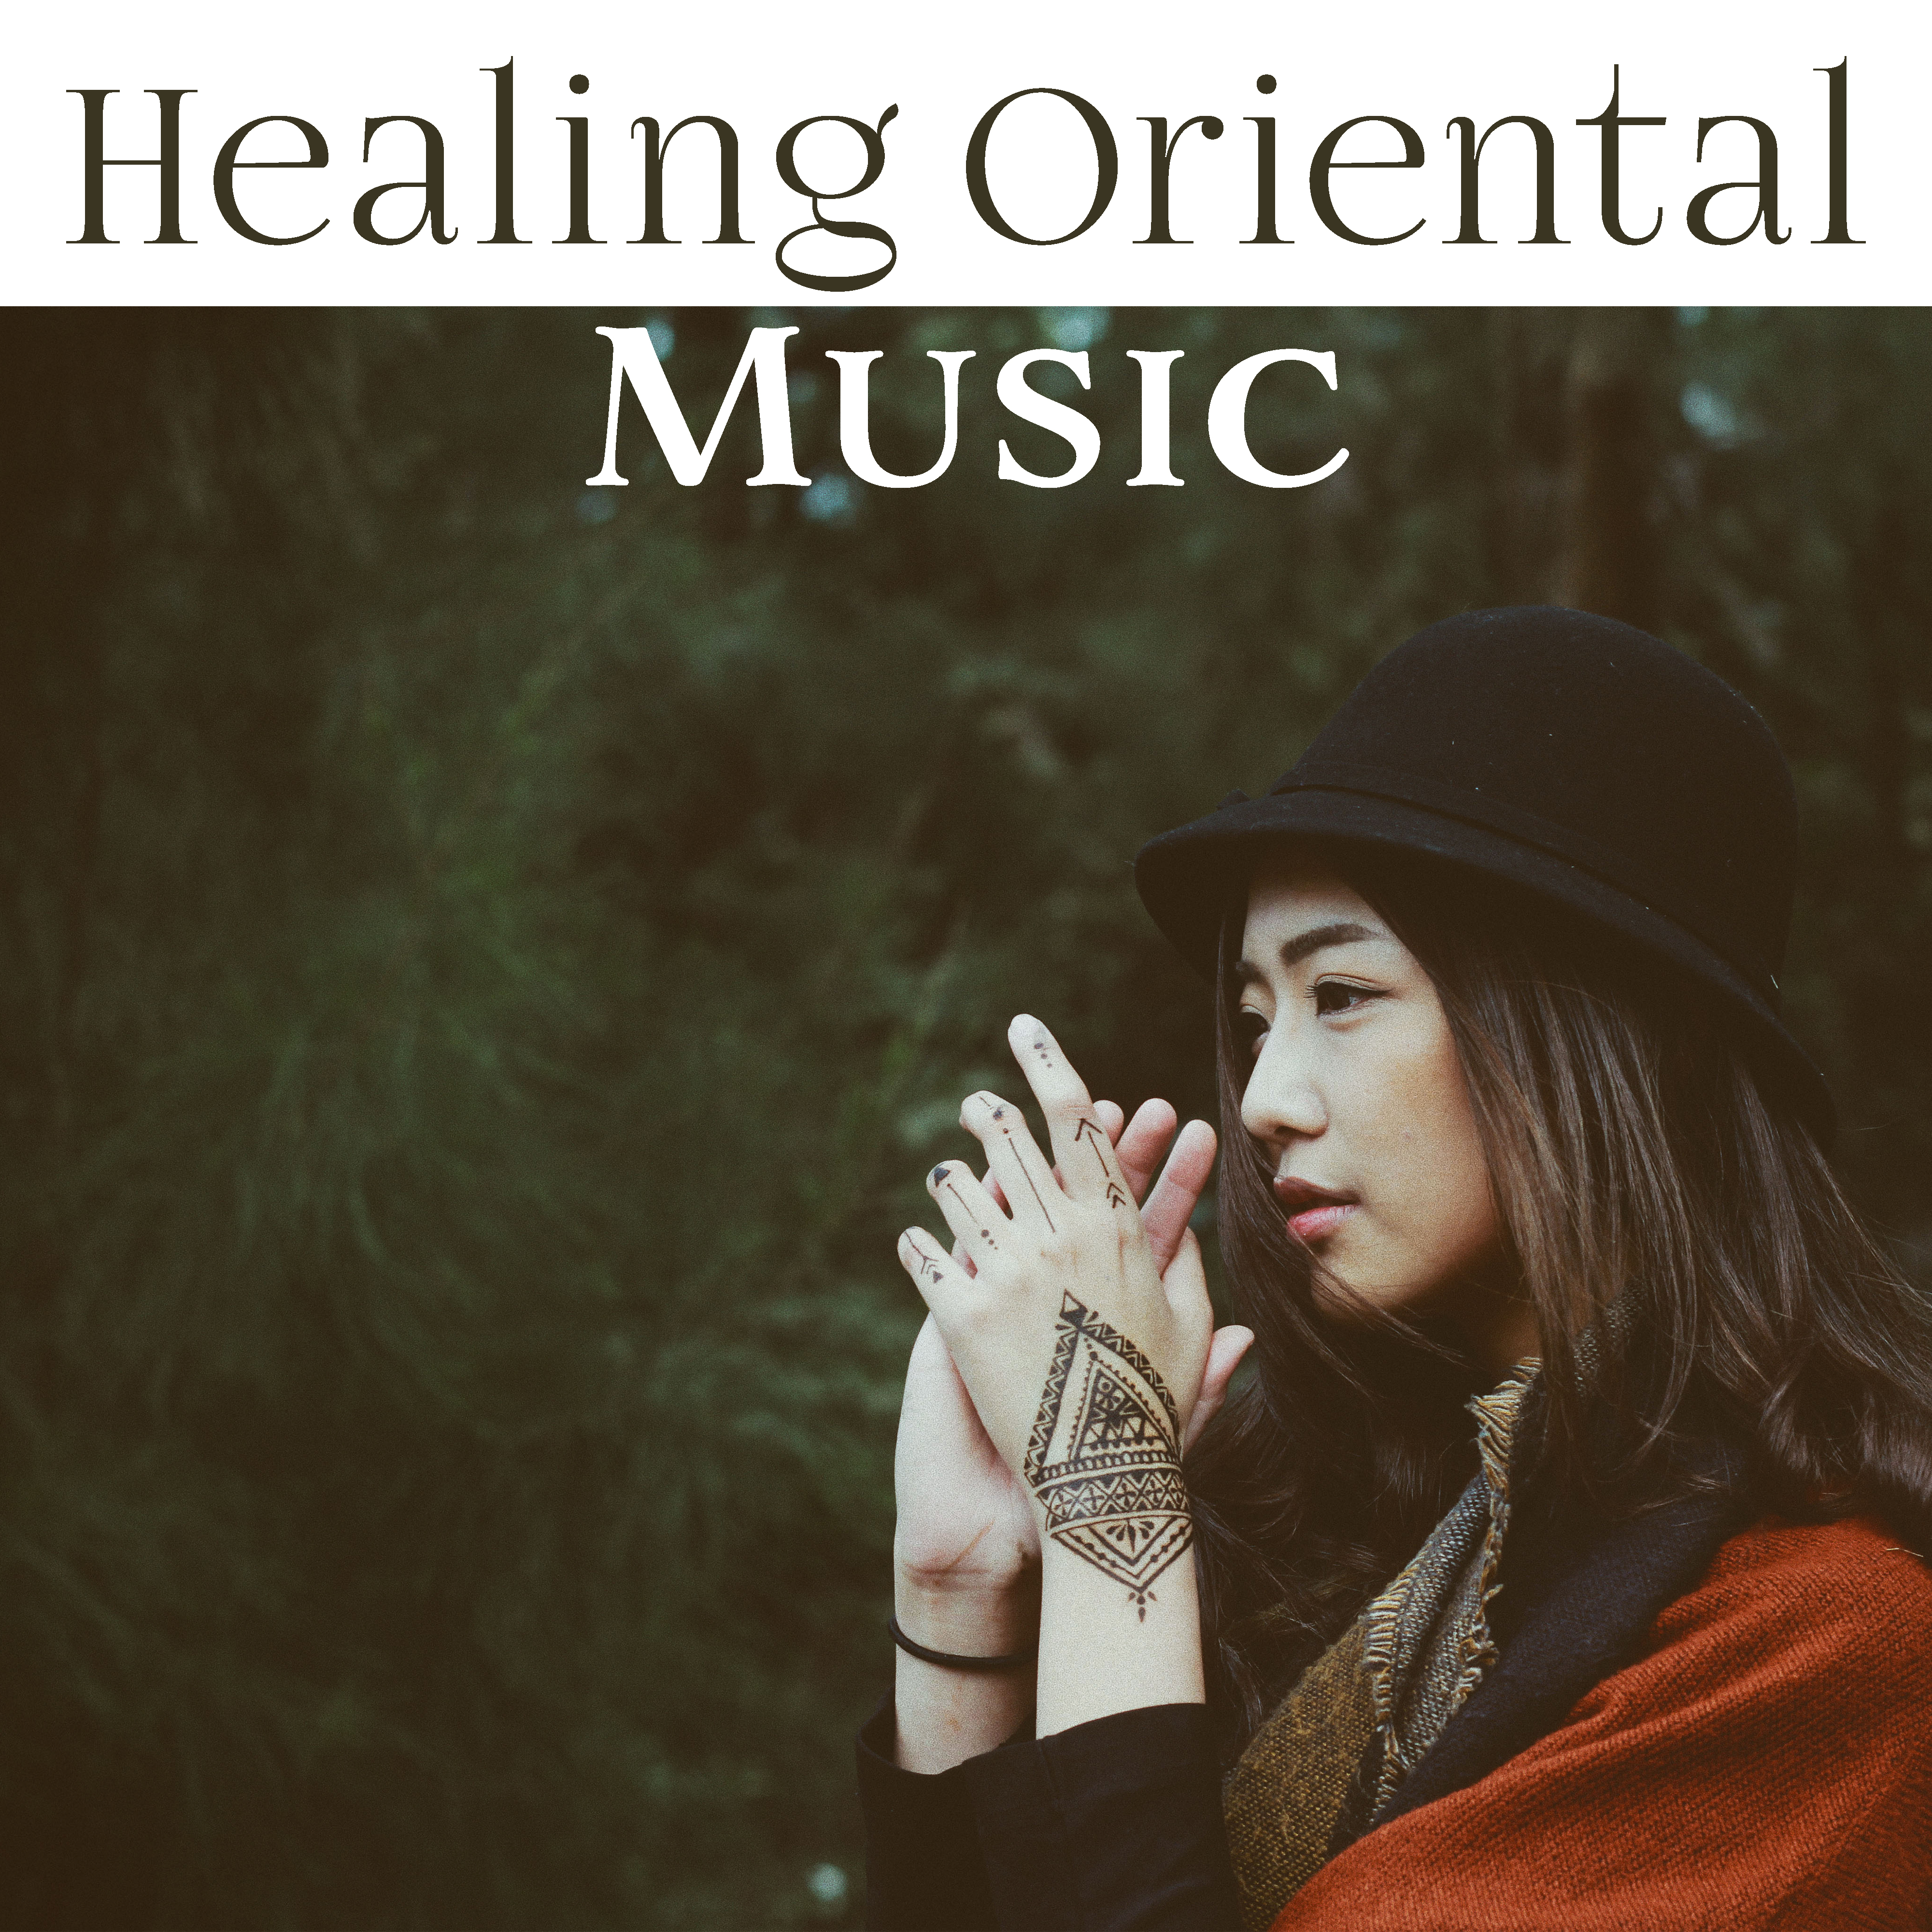 Healing Oriental Music  Soft Sounds for Mind Calmness, Easy Listening, New Age Melodies